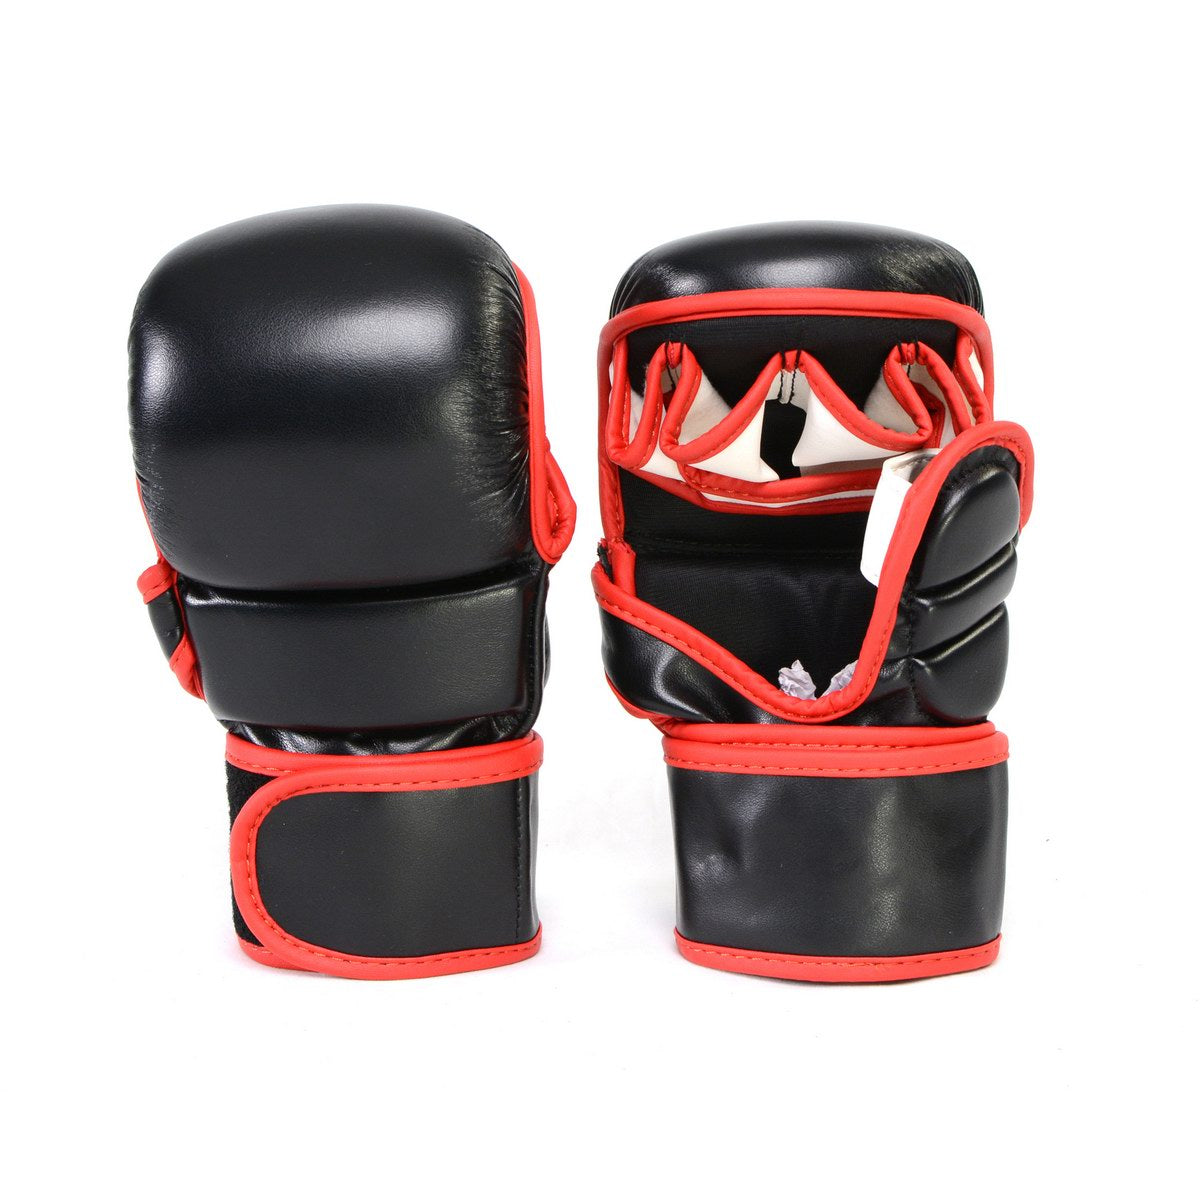 X-Fitness XF2001 7 oz MMA Hybrid Sparring Gloves-BLK/RED